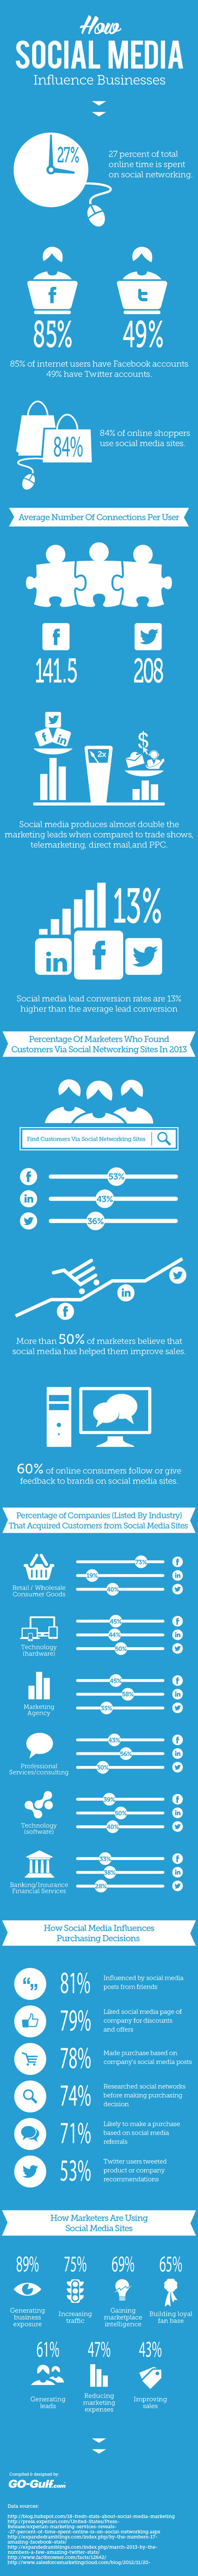 How Social Media Influence Businesses | Great #Infographic from Visual.ly | Social Marketing Revolution | Scoop.it